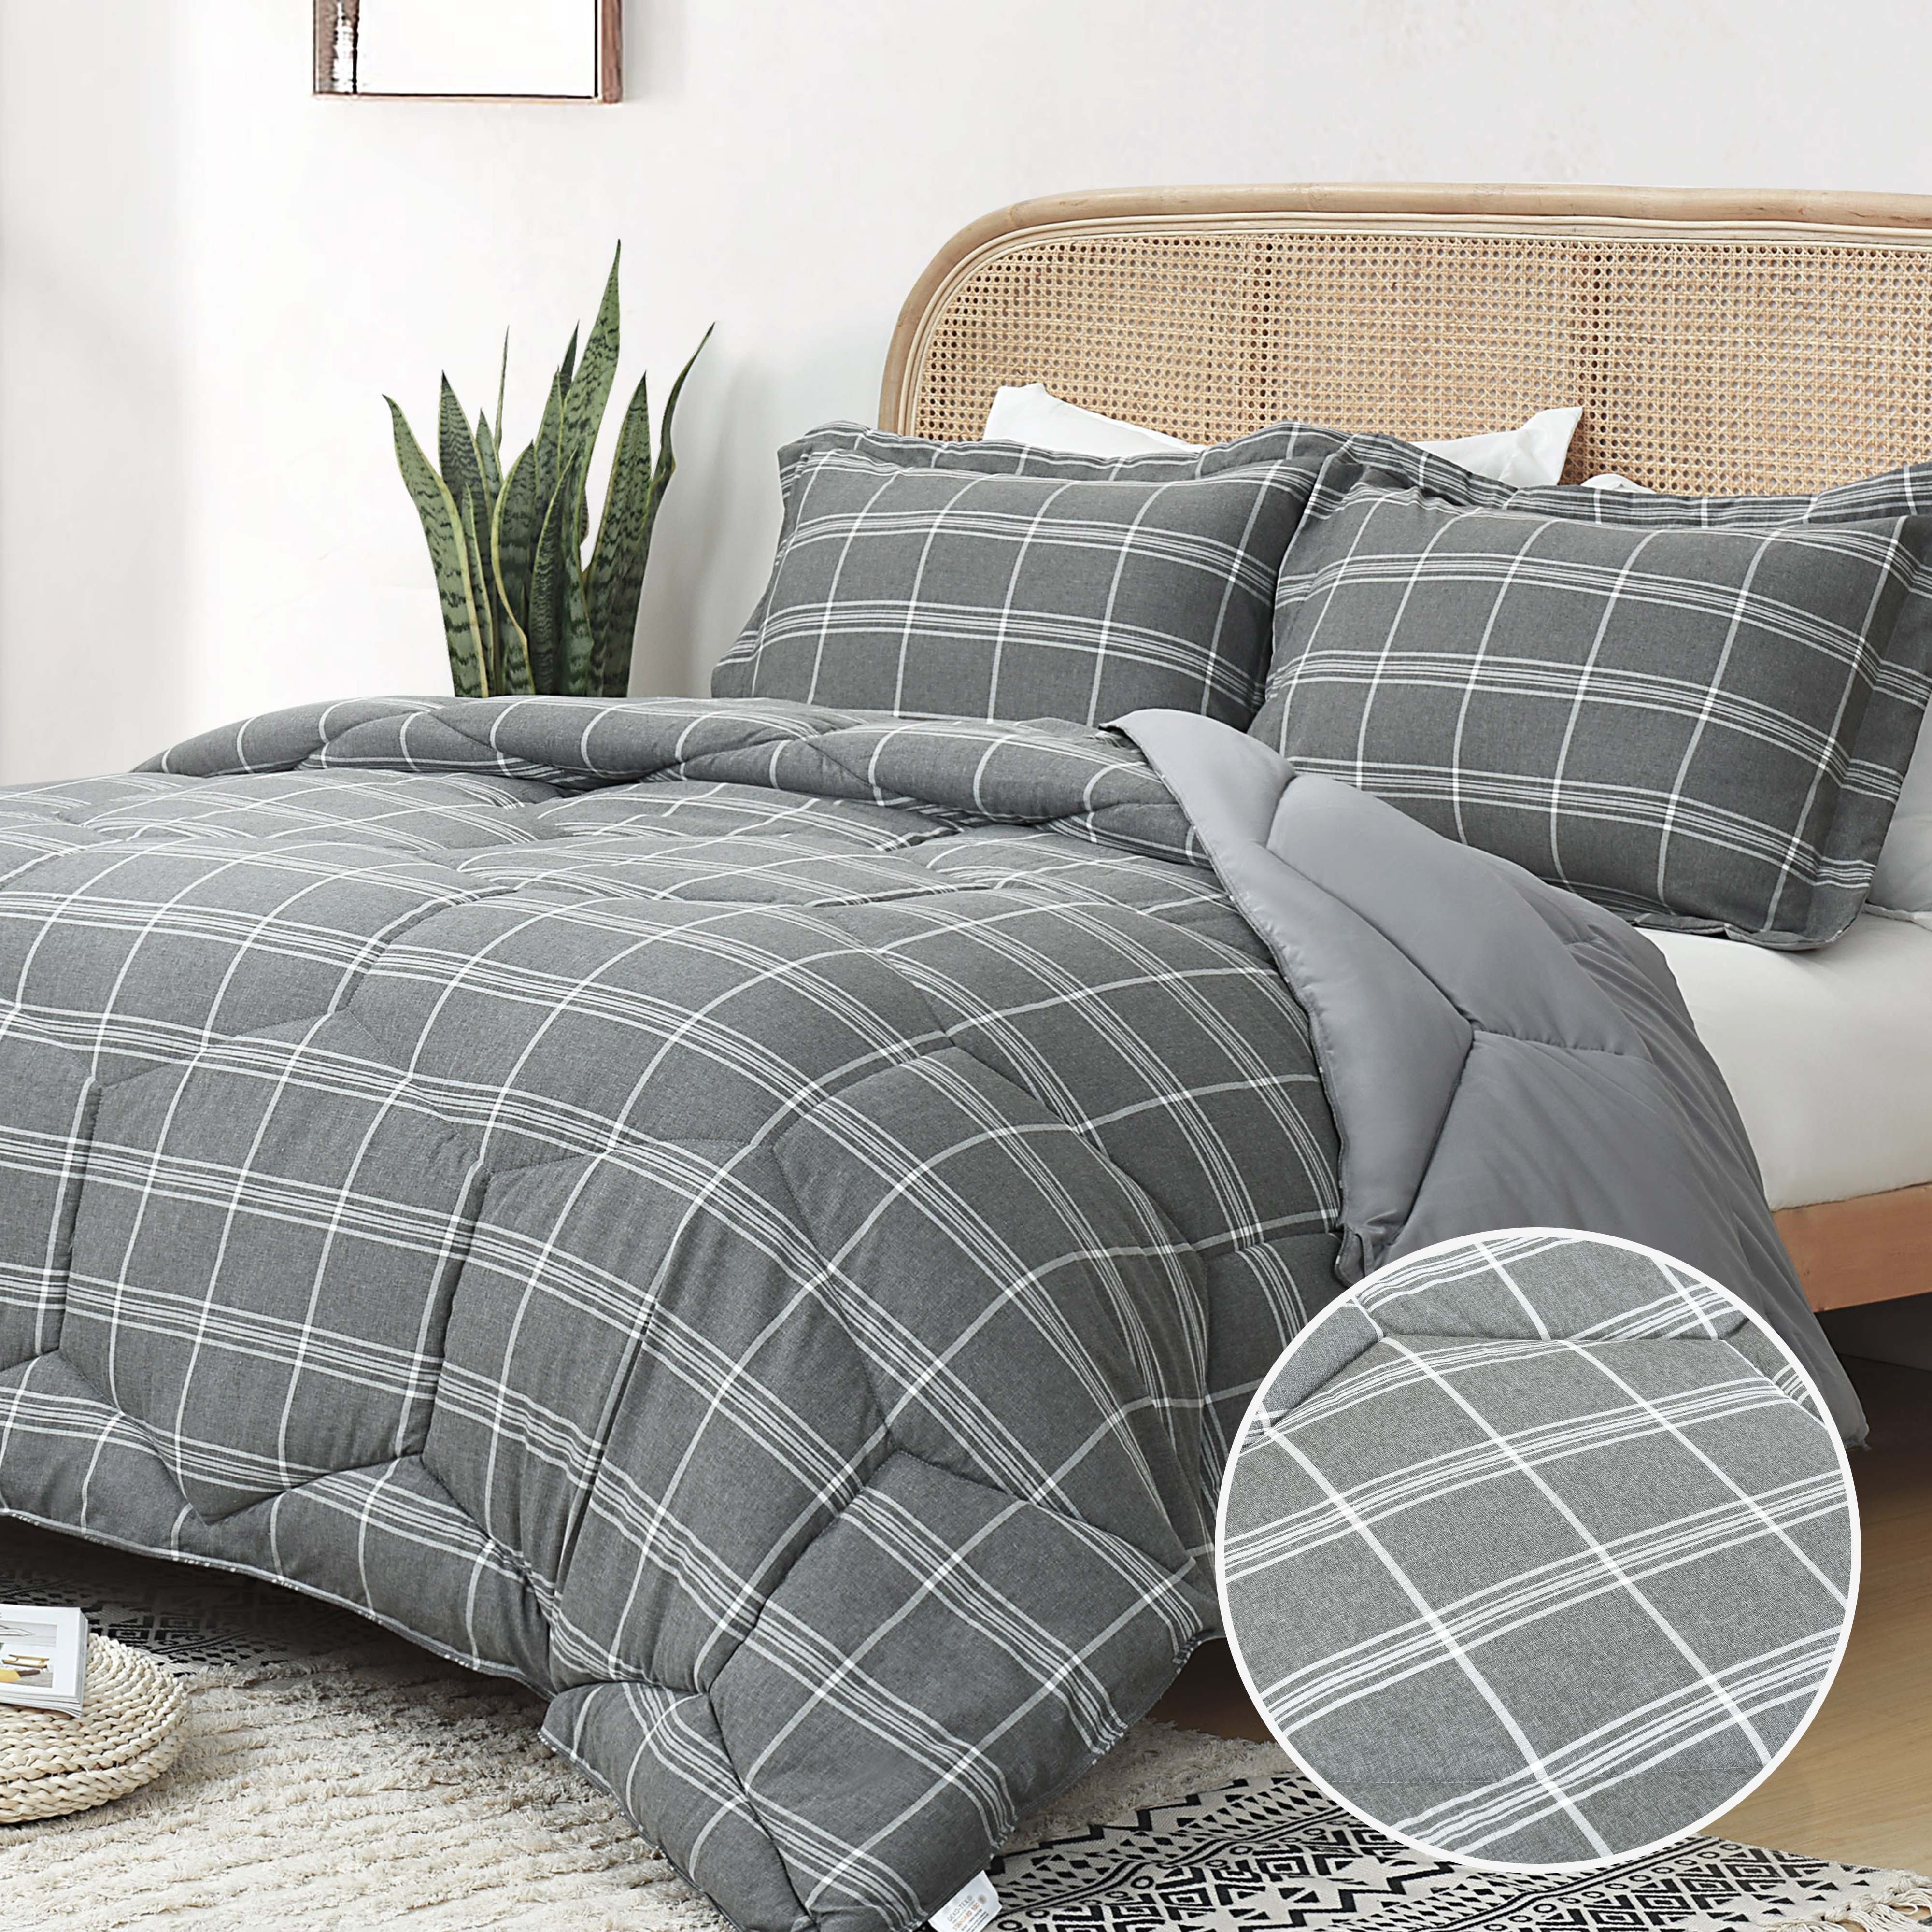 

3 Pieces Reversible Quilted Comforter Set, Cationic Dyeing Comforter With Contemporary Plaid Pattern, Preppy Bedding Sets-include 1 Comforter, 2 Pillow Shams For Bedroom